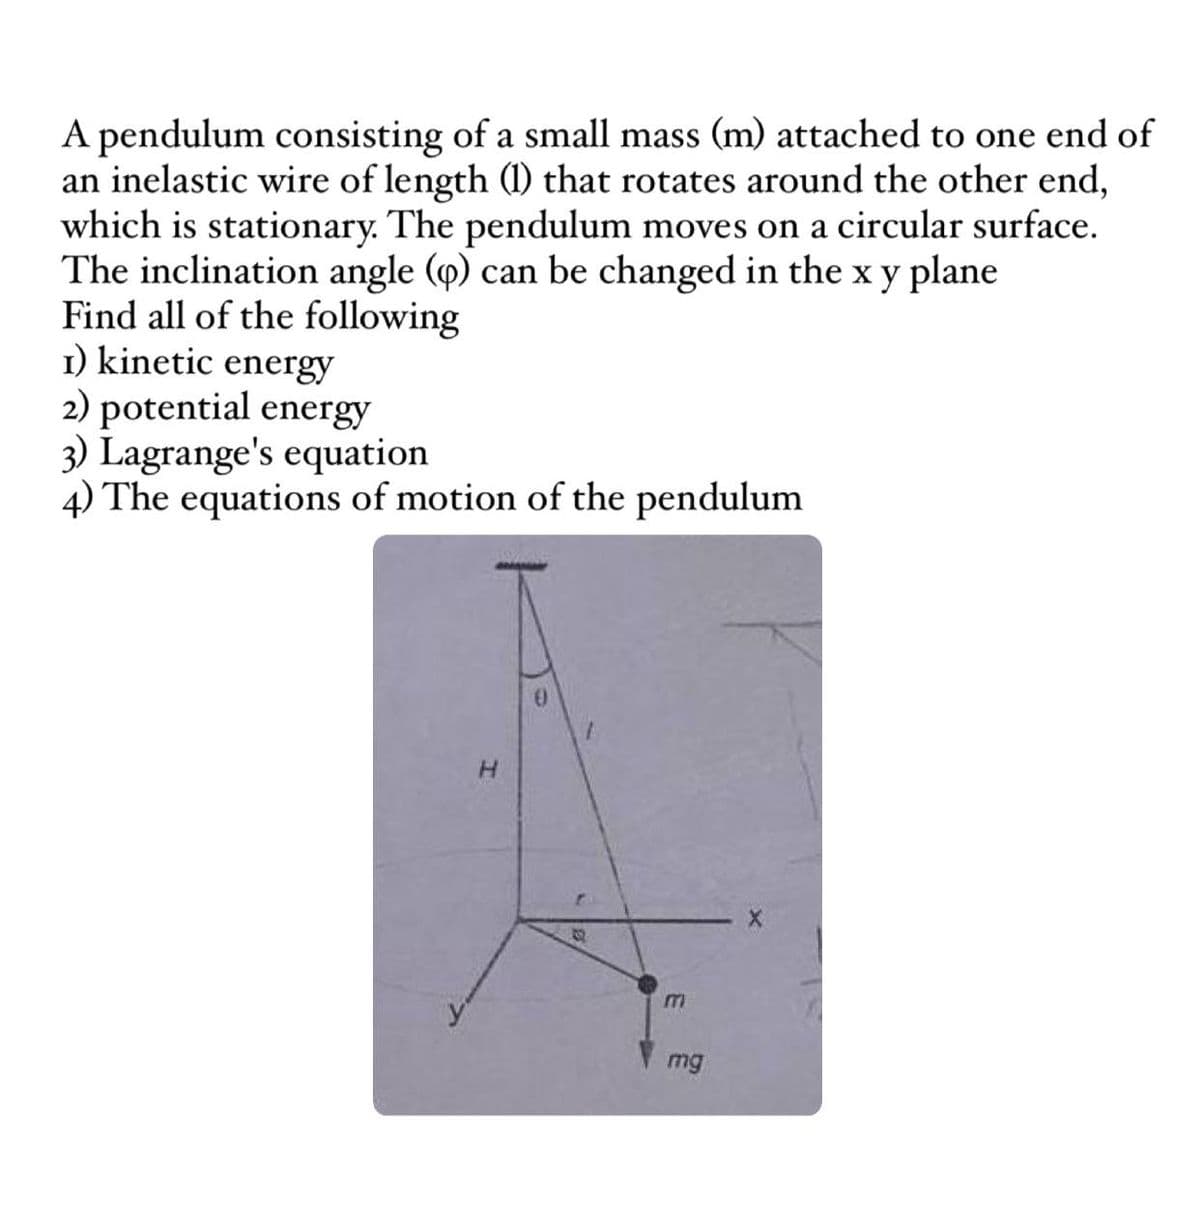 A pendulum consisting of a small mass (m) attached to one end of
an inelastic wire of length (1) that rotates around the other end,
which is stationary. The pendulum moves on a circular surface.
The inclination angle (p) can be changed in the x y plane
Find all of the following
1) kinetic energy
2) potential energy
3) Lagrange's equation
4) The equations of motion of the pendulum
H
m
mg